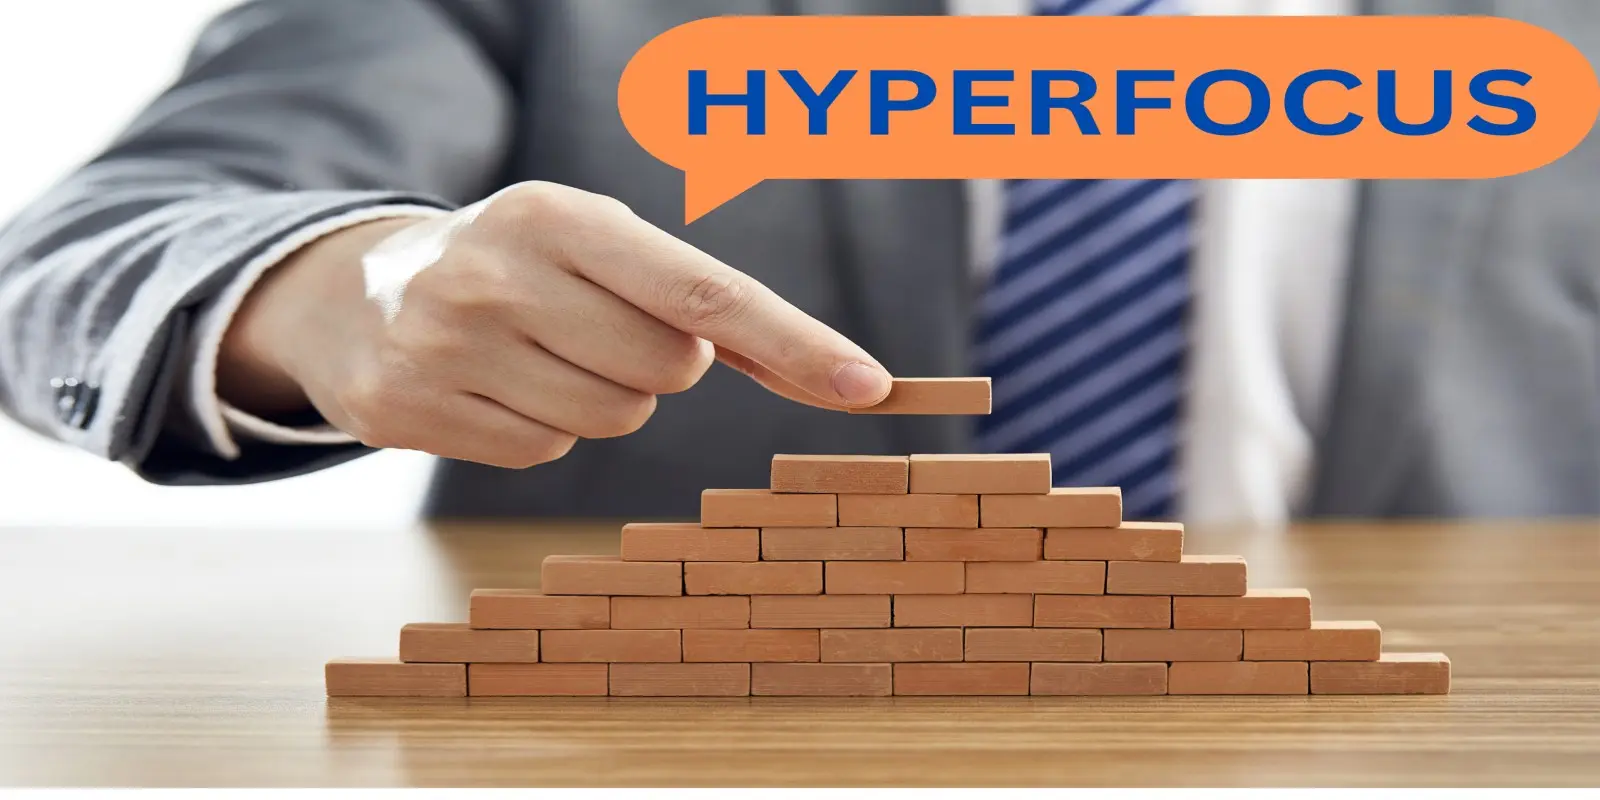 Hyperfocus: 6 Important Tips to Cope With Hyperfocus